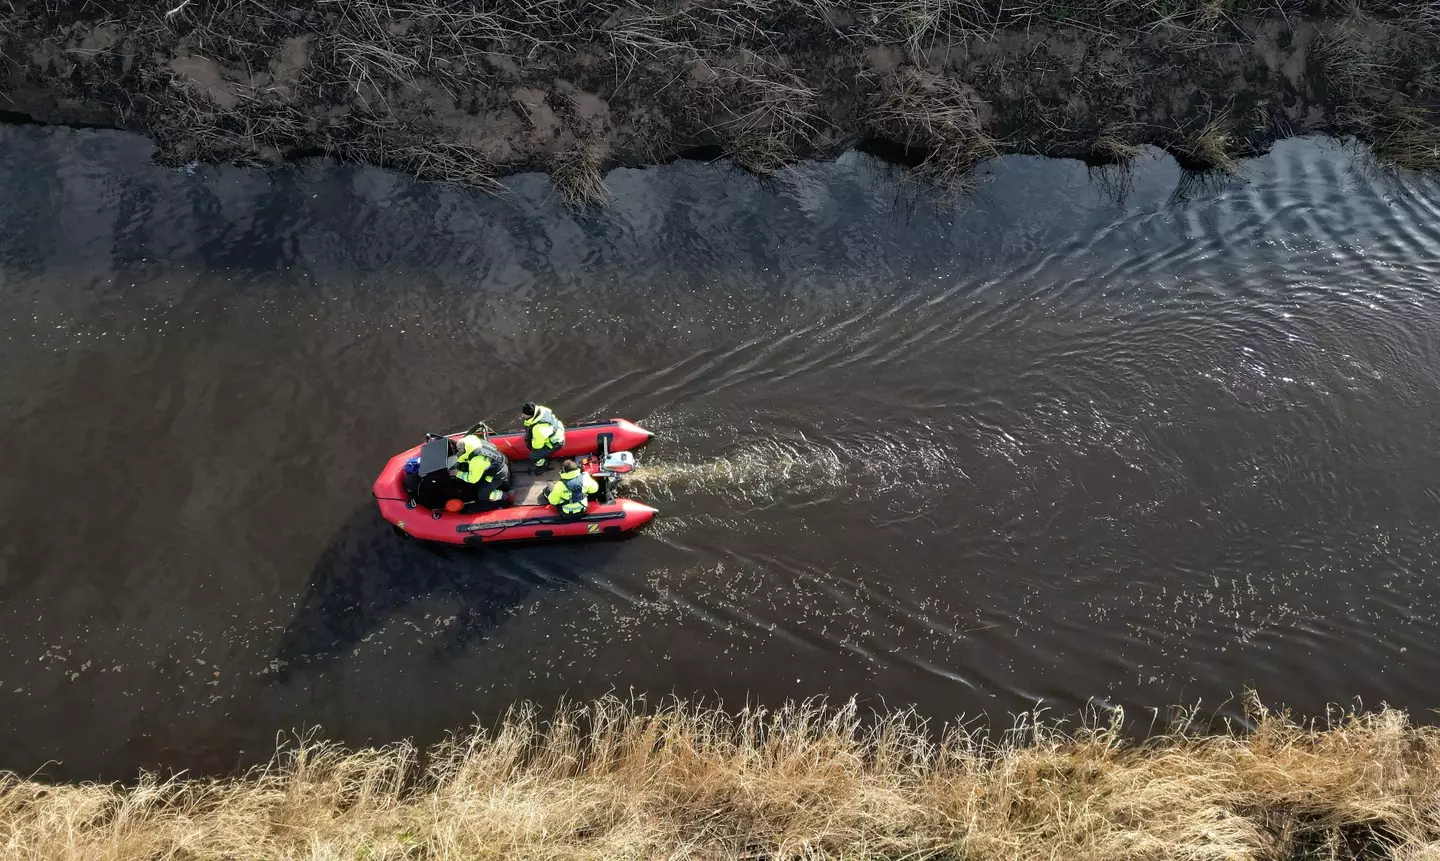 Members of the Specialist Group International searched the river.